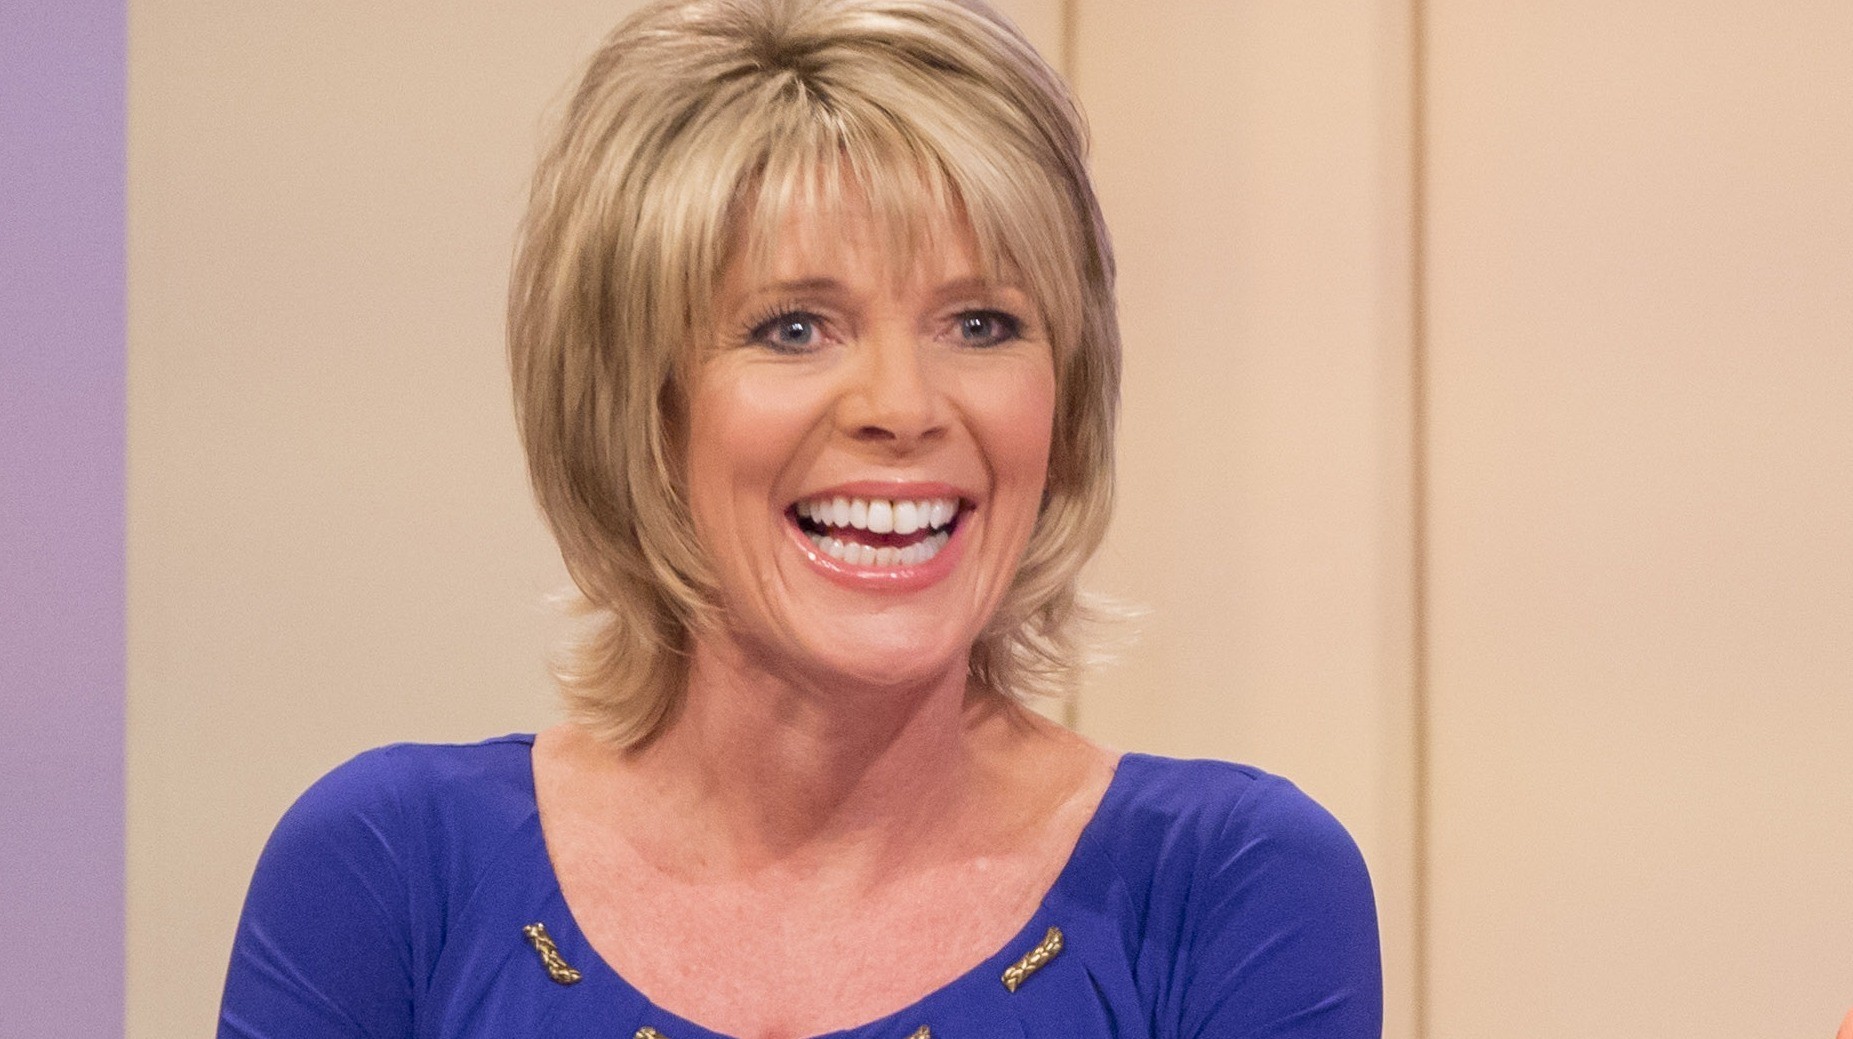 Ruth Langsford is a longtime co-host of Loose Women